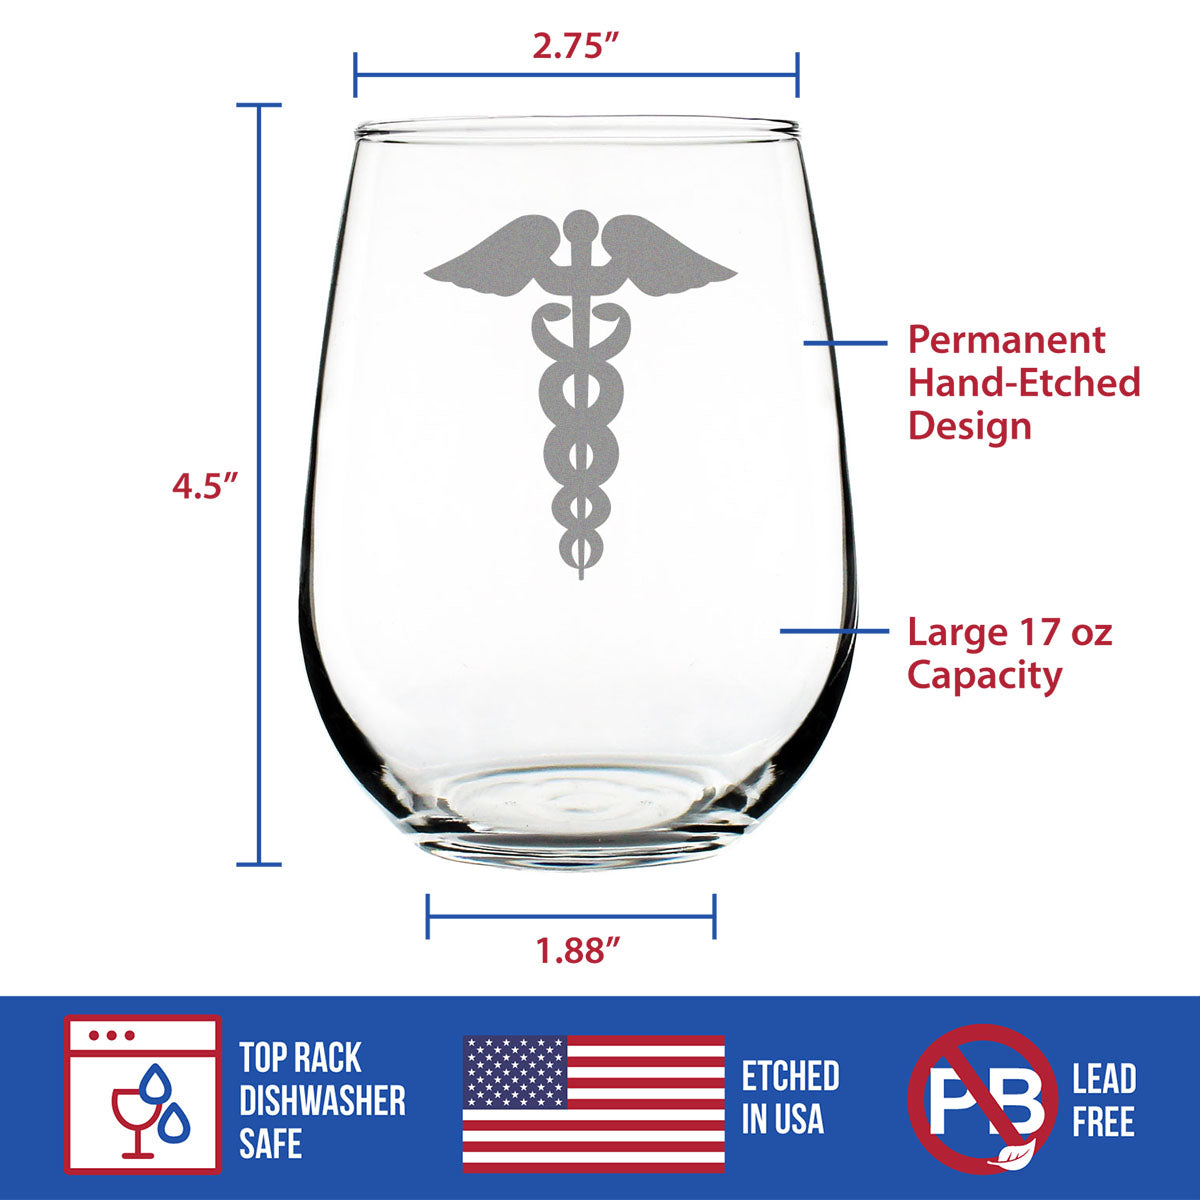 Caduceus Stemless Wine Glass for Essential Healthcare Workers, Doctors, Nurses, Medical Staff - Large 17 oz